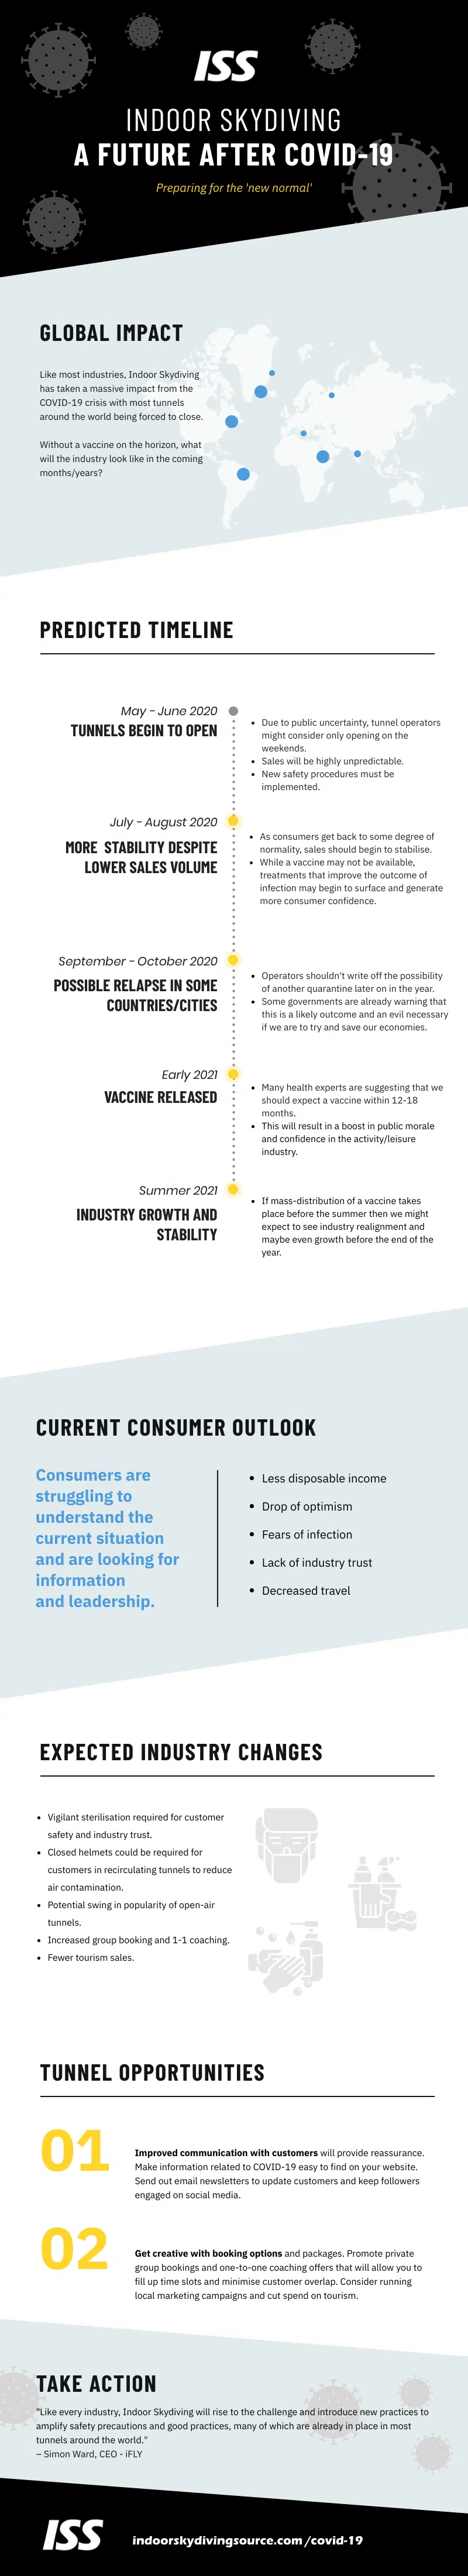 Infographic - Indoor Skydiving Industry After Covid-19